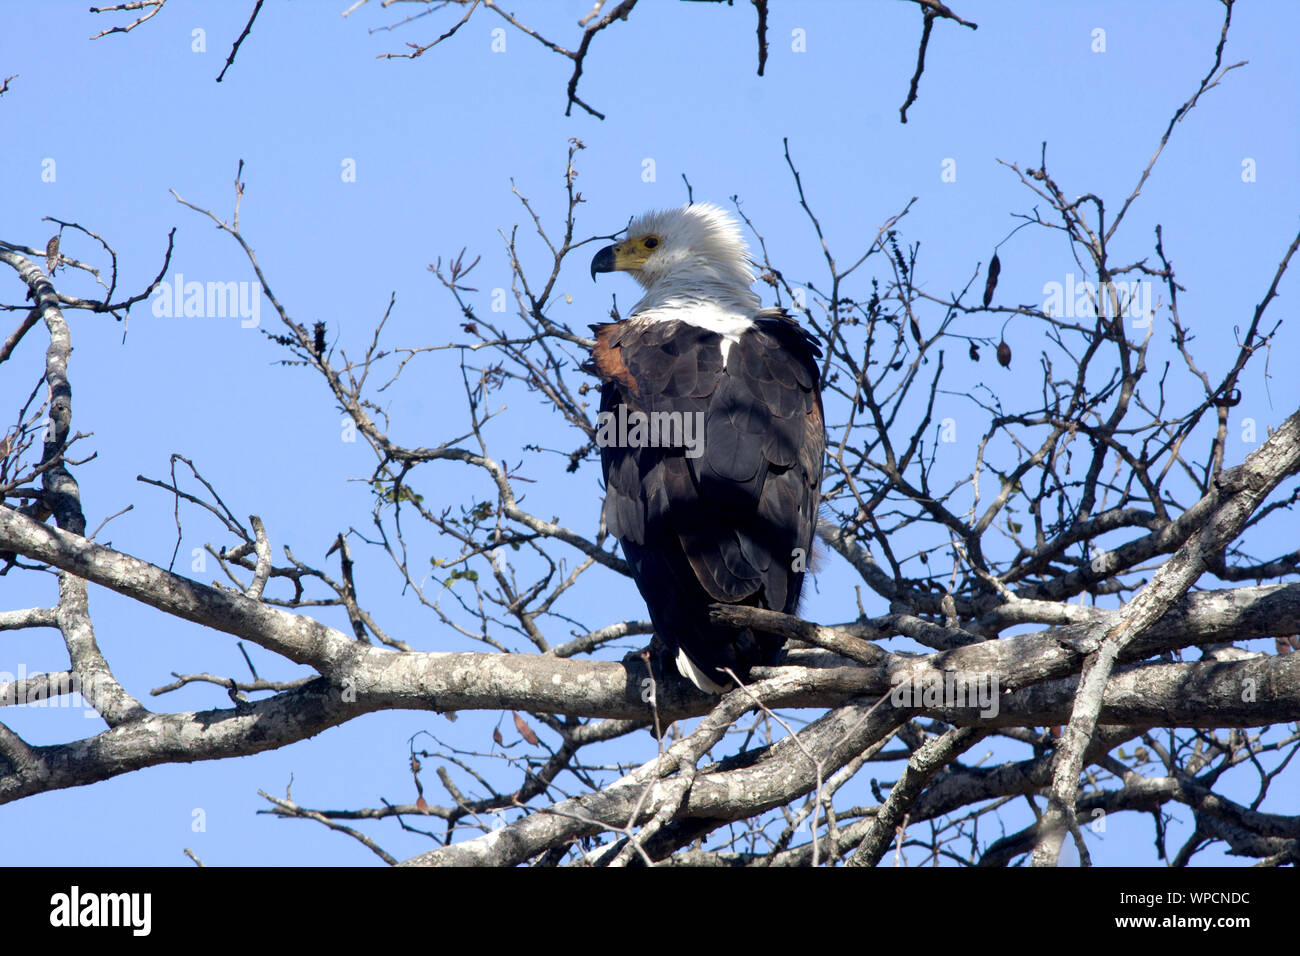 A regal South African Fish Eagle keeping watch Stock Photo